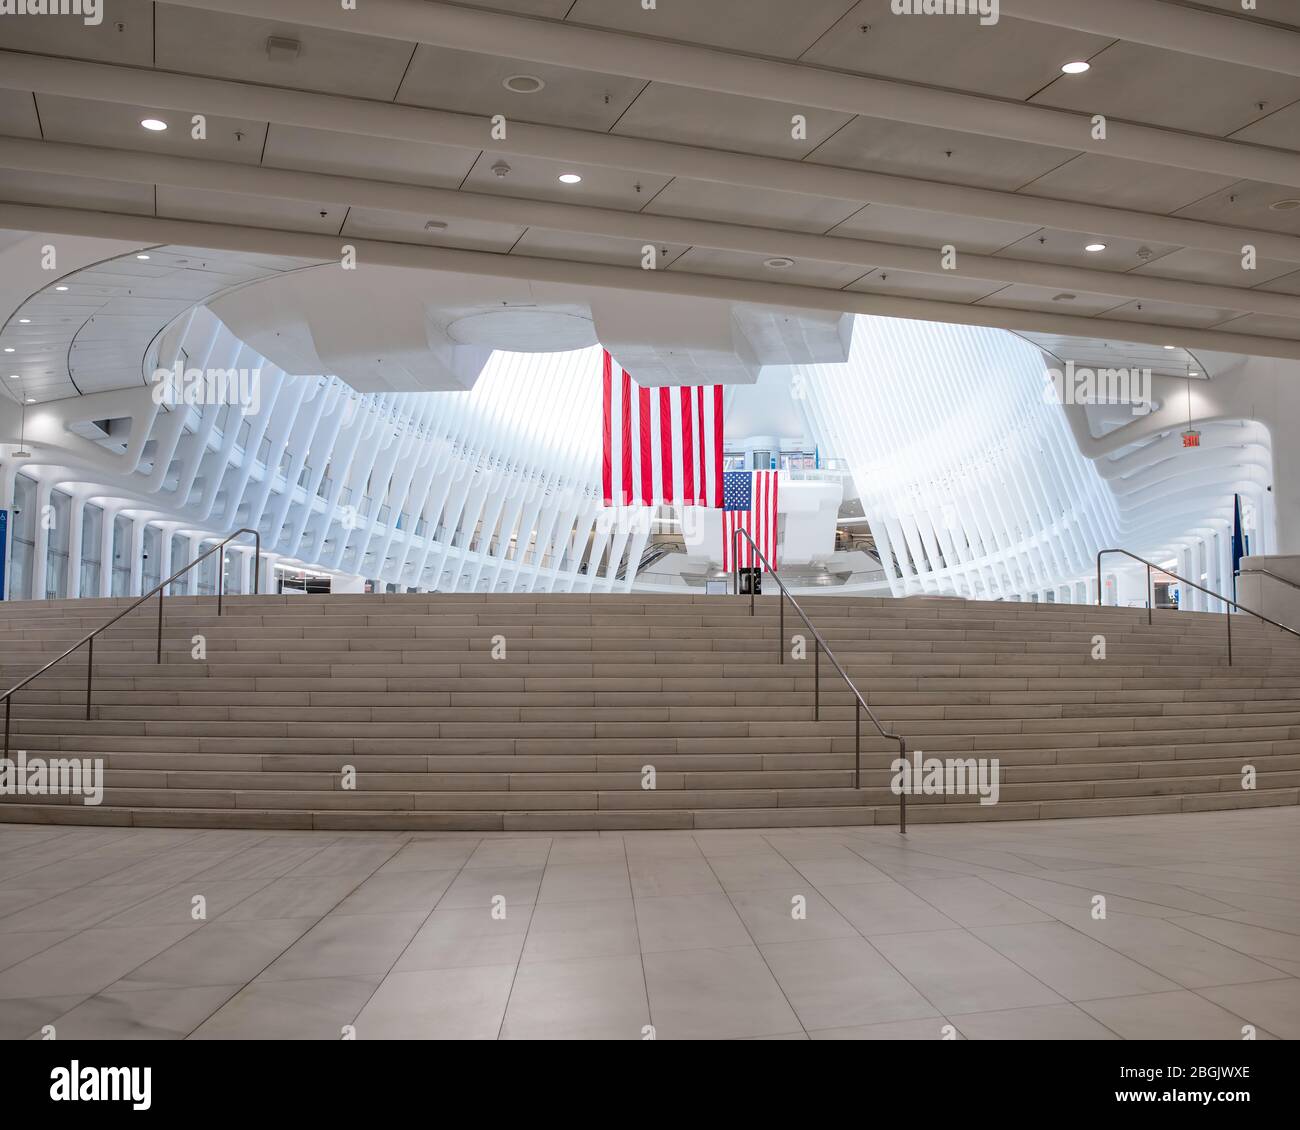 Oculus interior at World Trade Center with American flag and stairway in the foreground with strikingj white vertical lines in background. Stock Photo